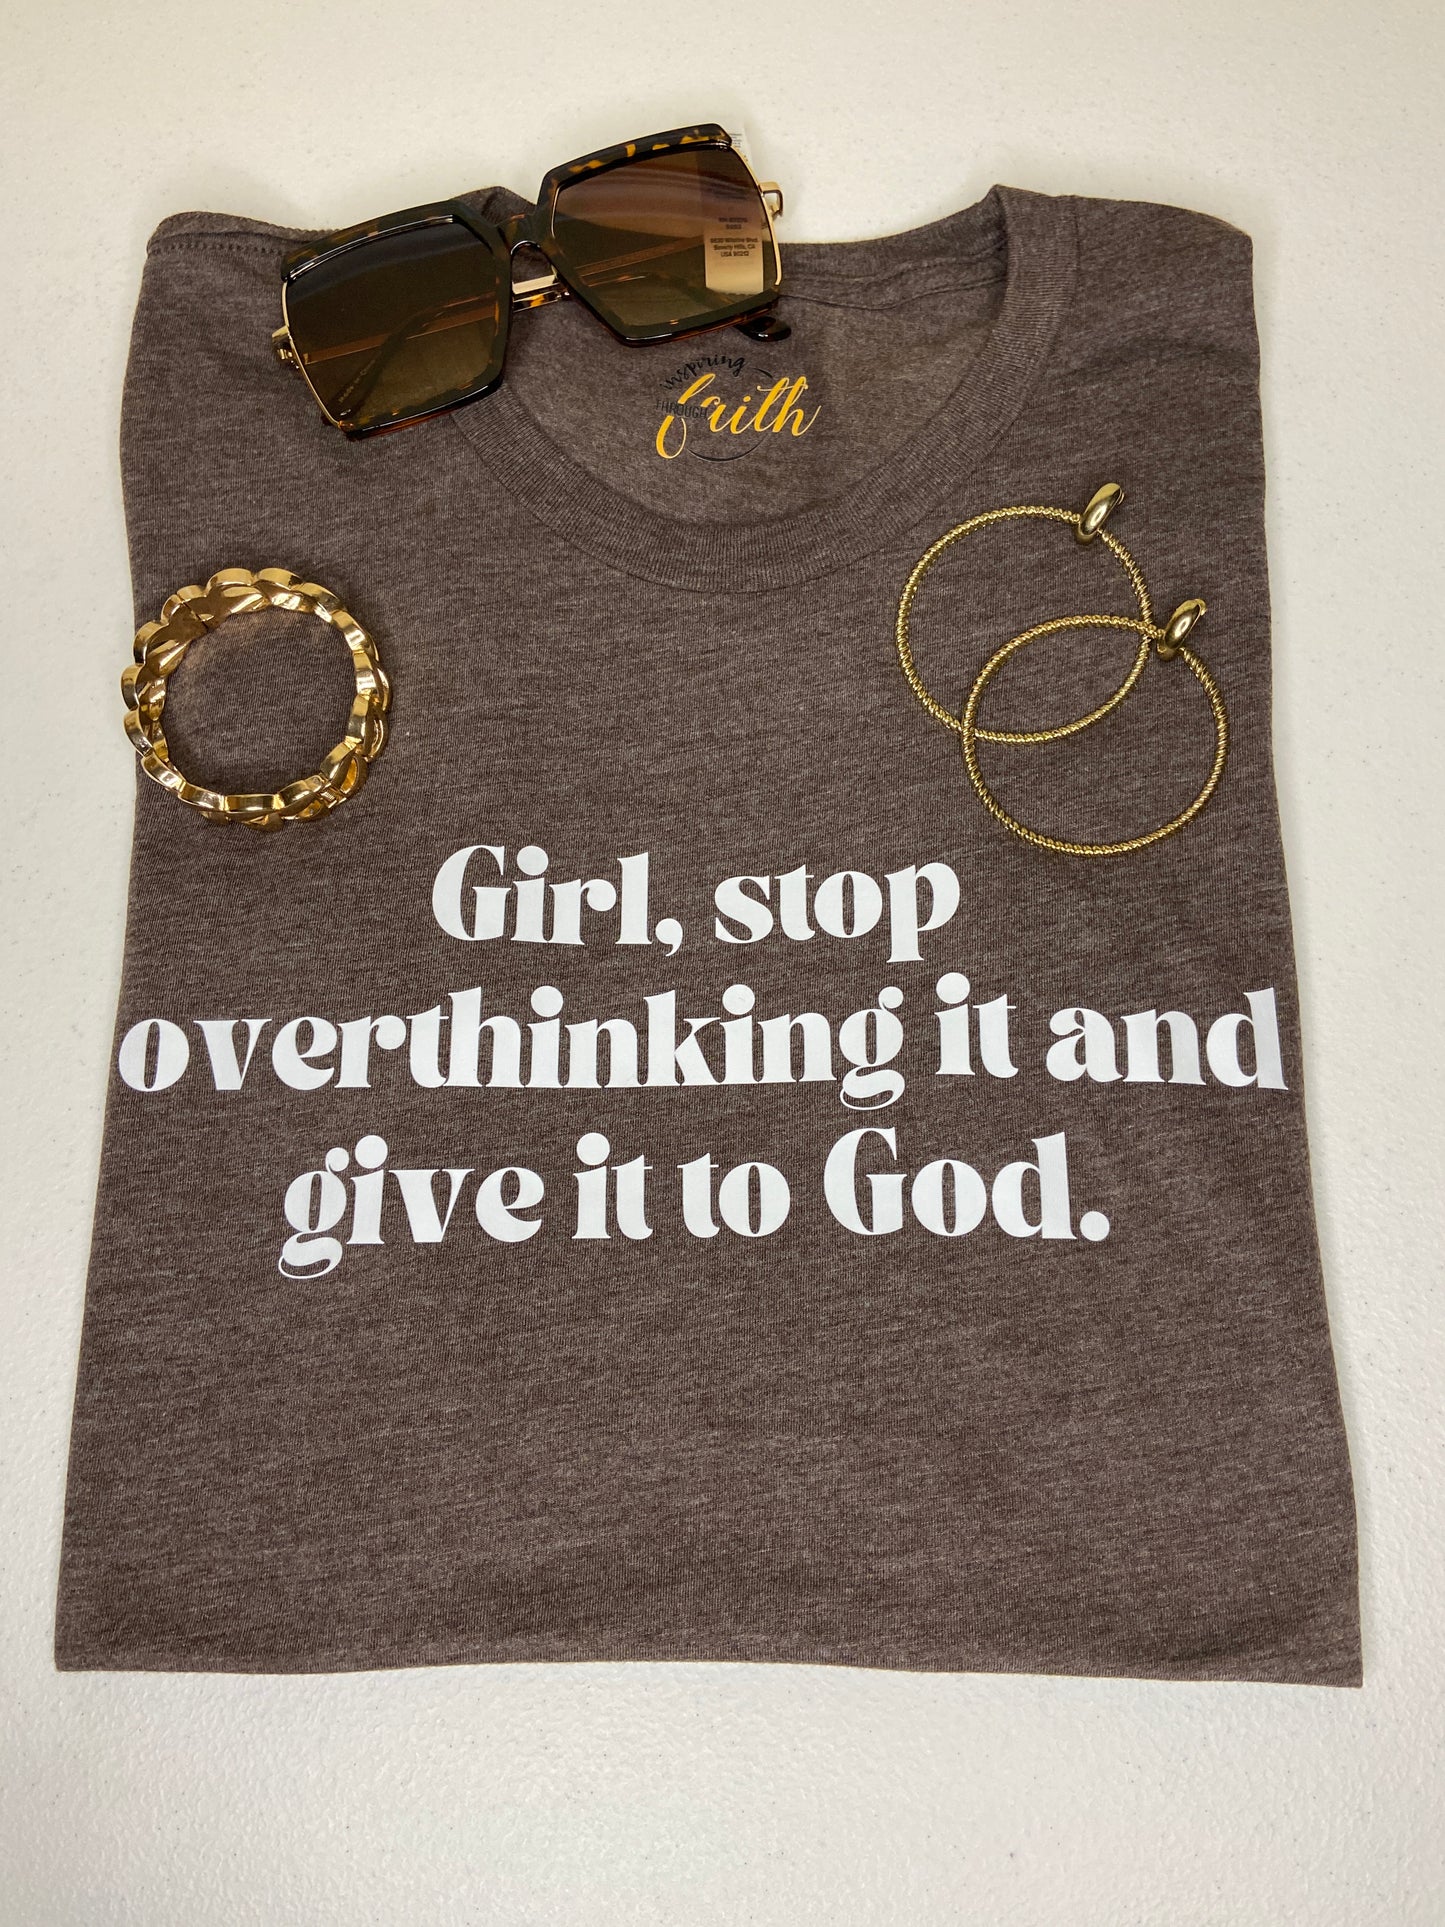 Girl, stop overthinking it and give it to God